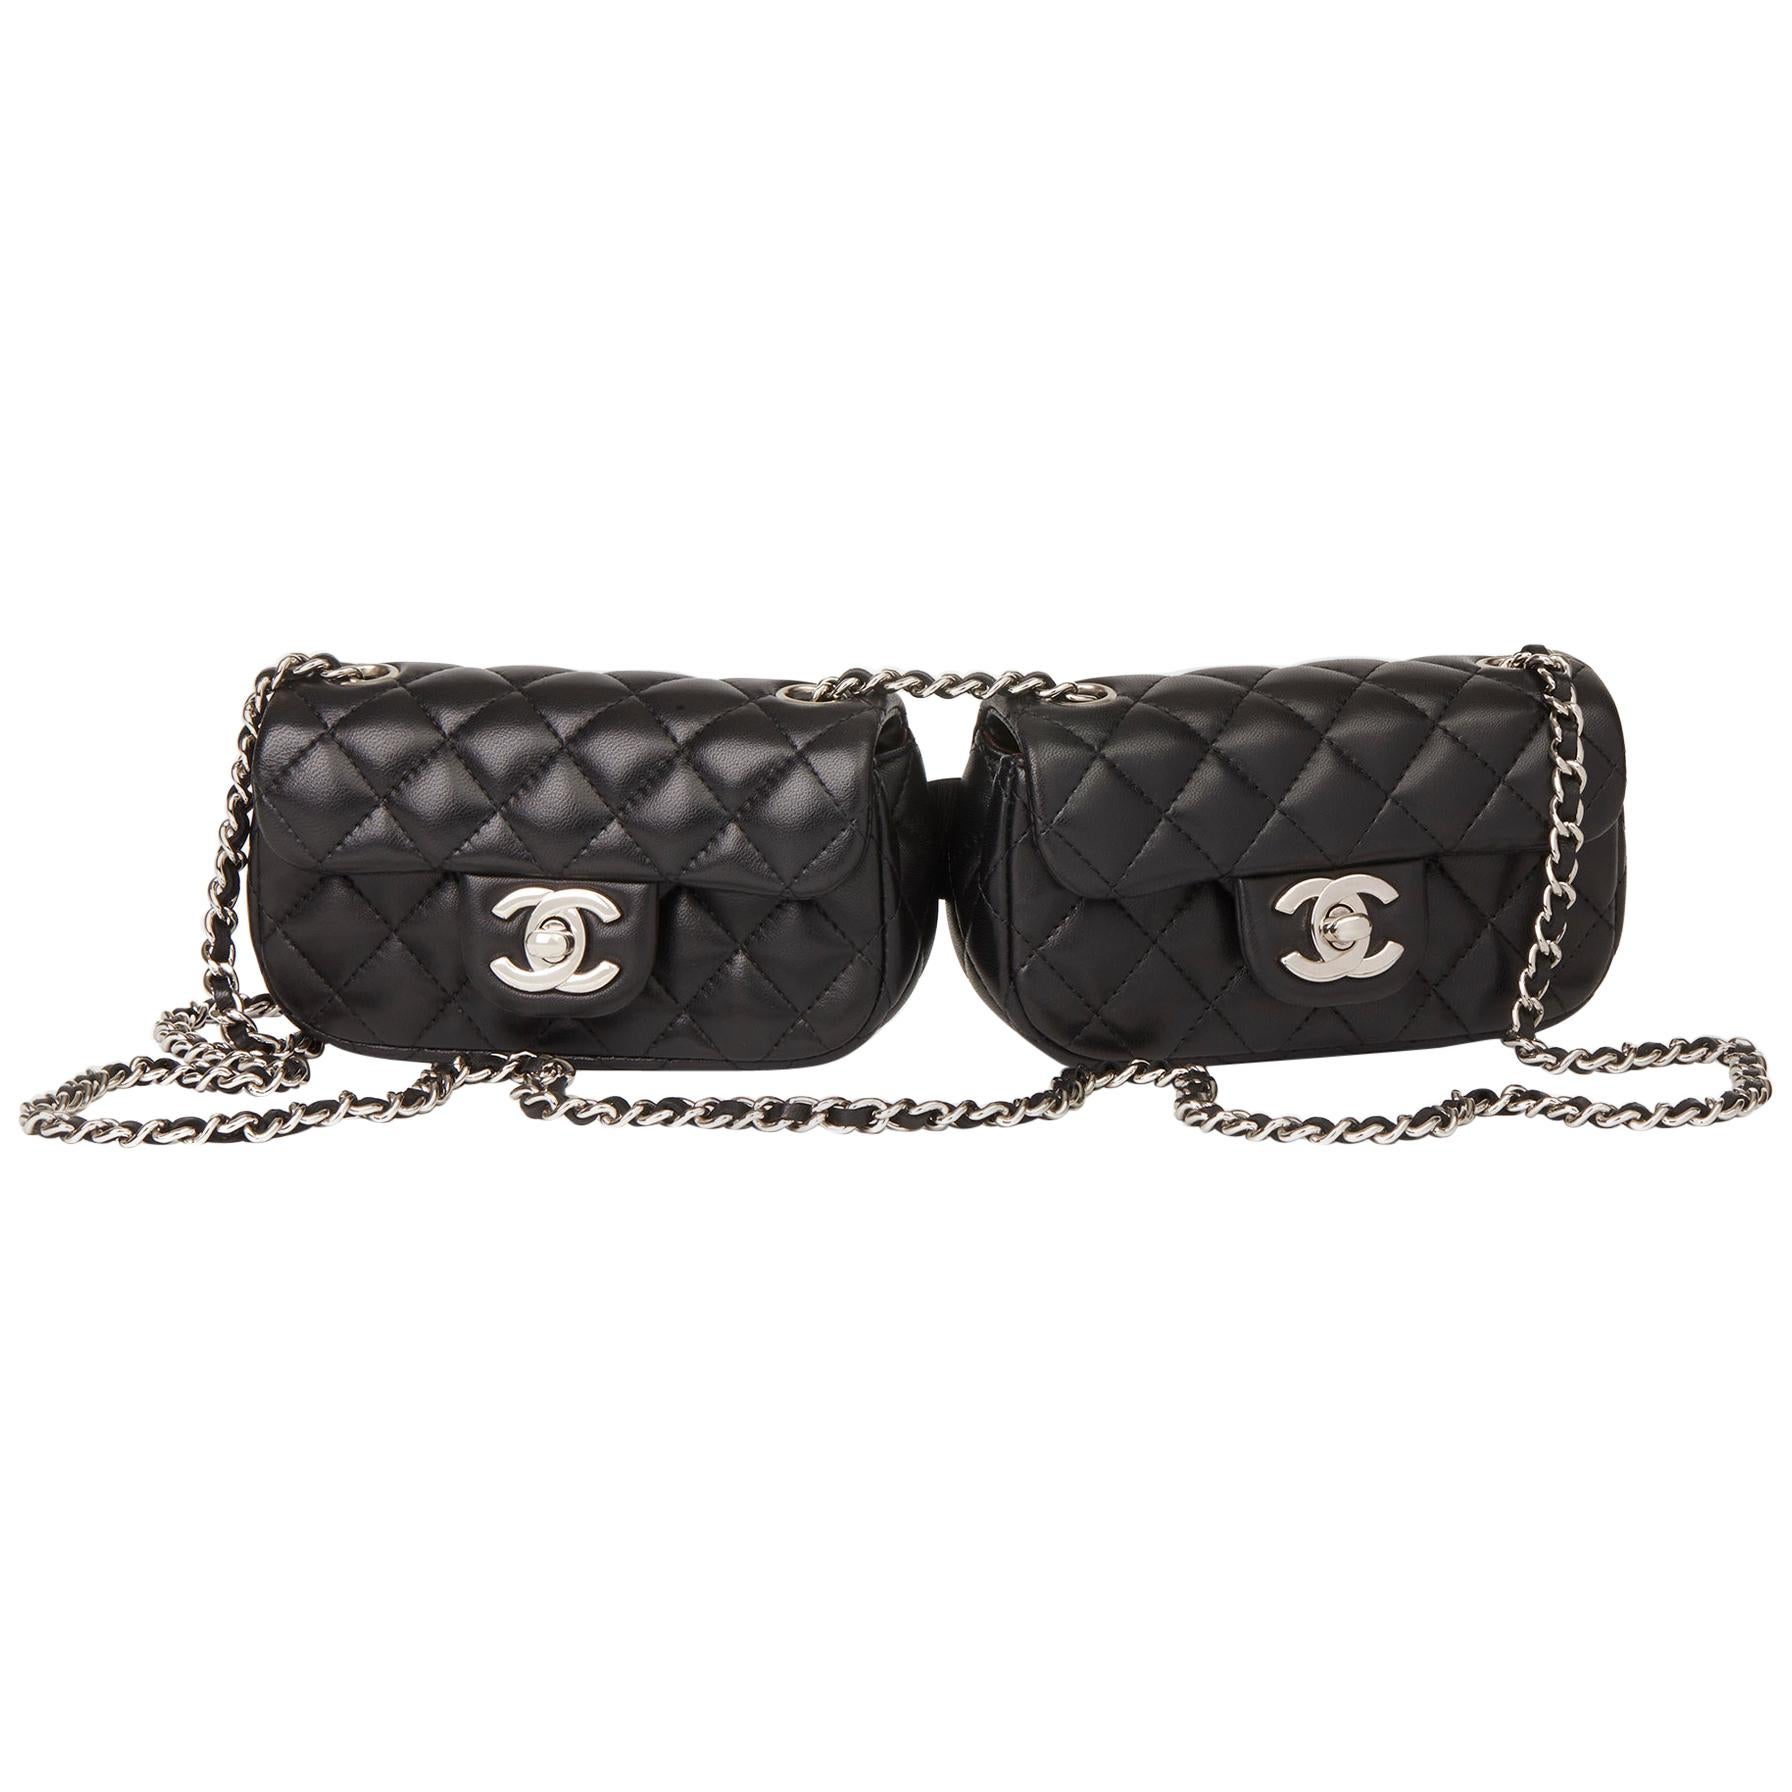 2011 Chanel Black Quilted Lambskin Double Mini Flap Bag